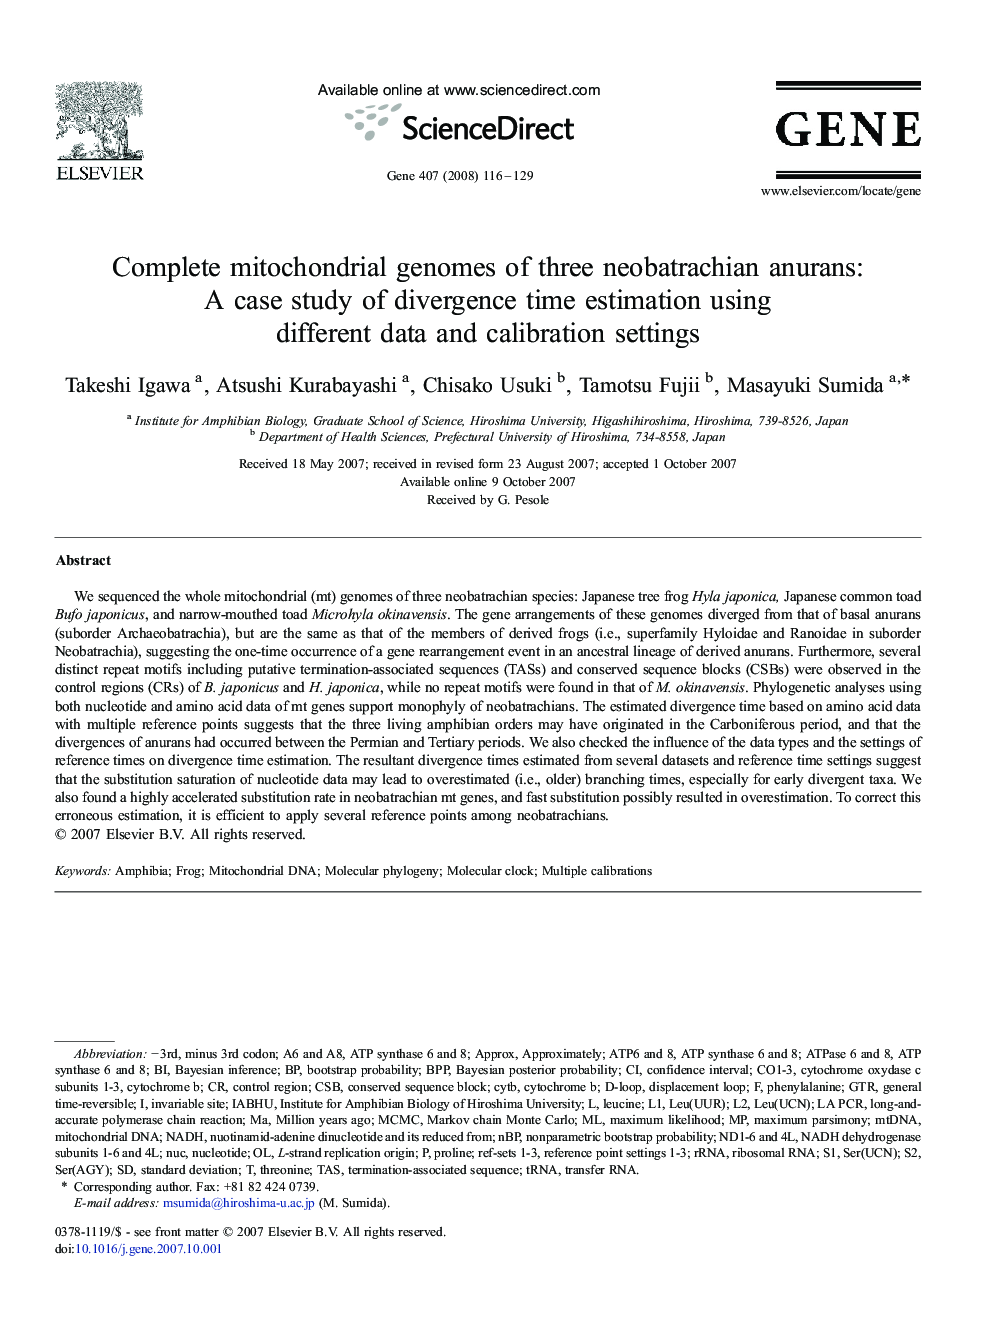 Complete mitochondrial genomes of three neobatrachian anurans: A case study of divergence time estimation using different data and calibration settings